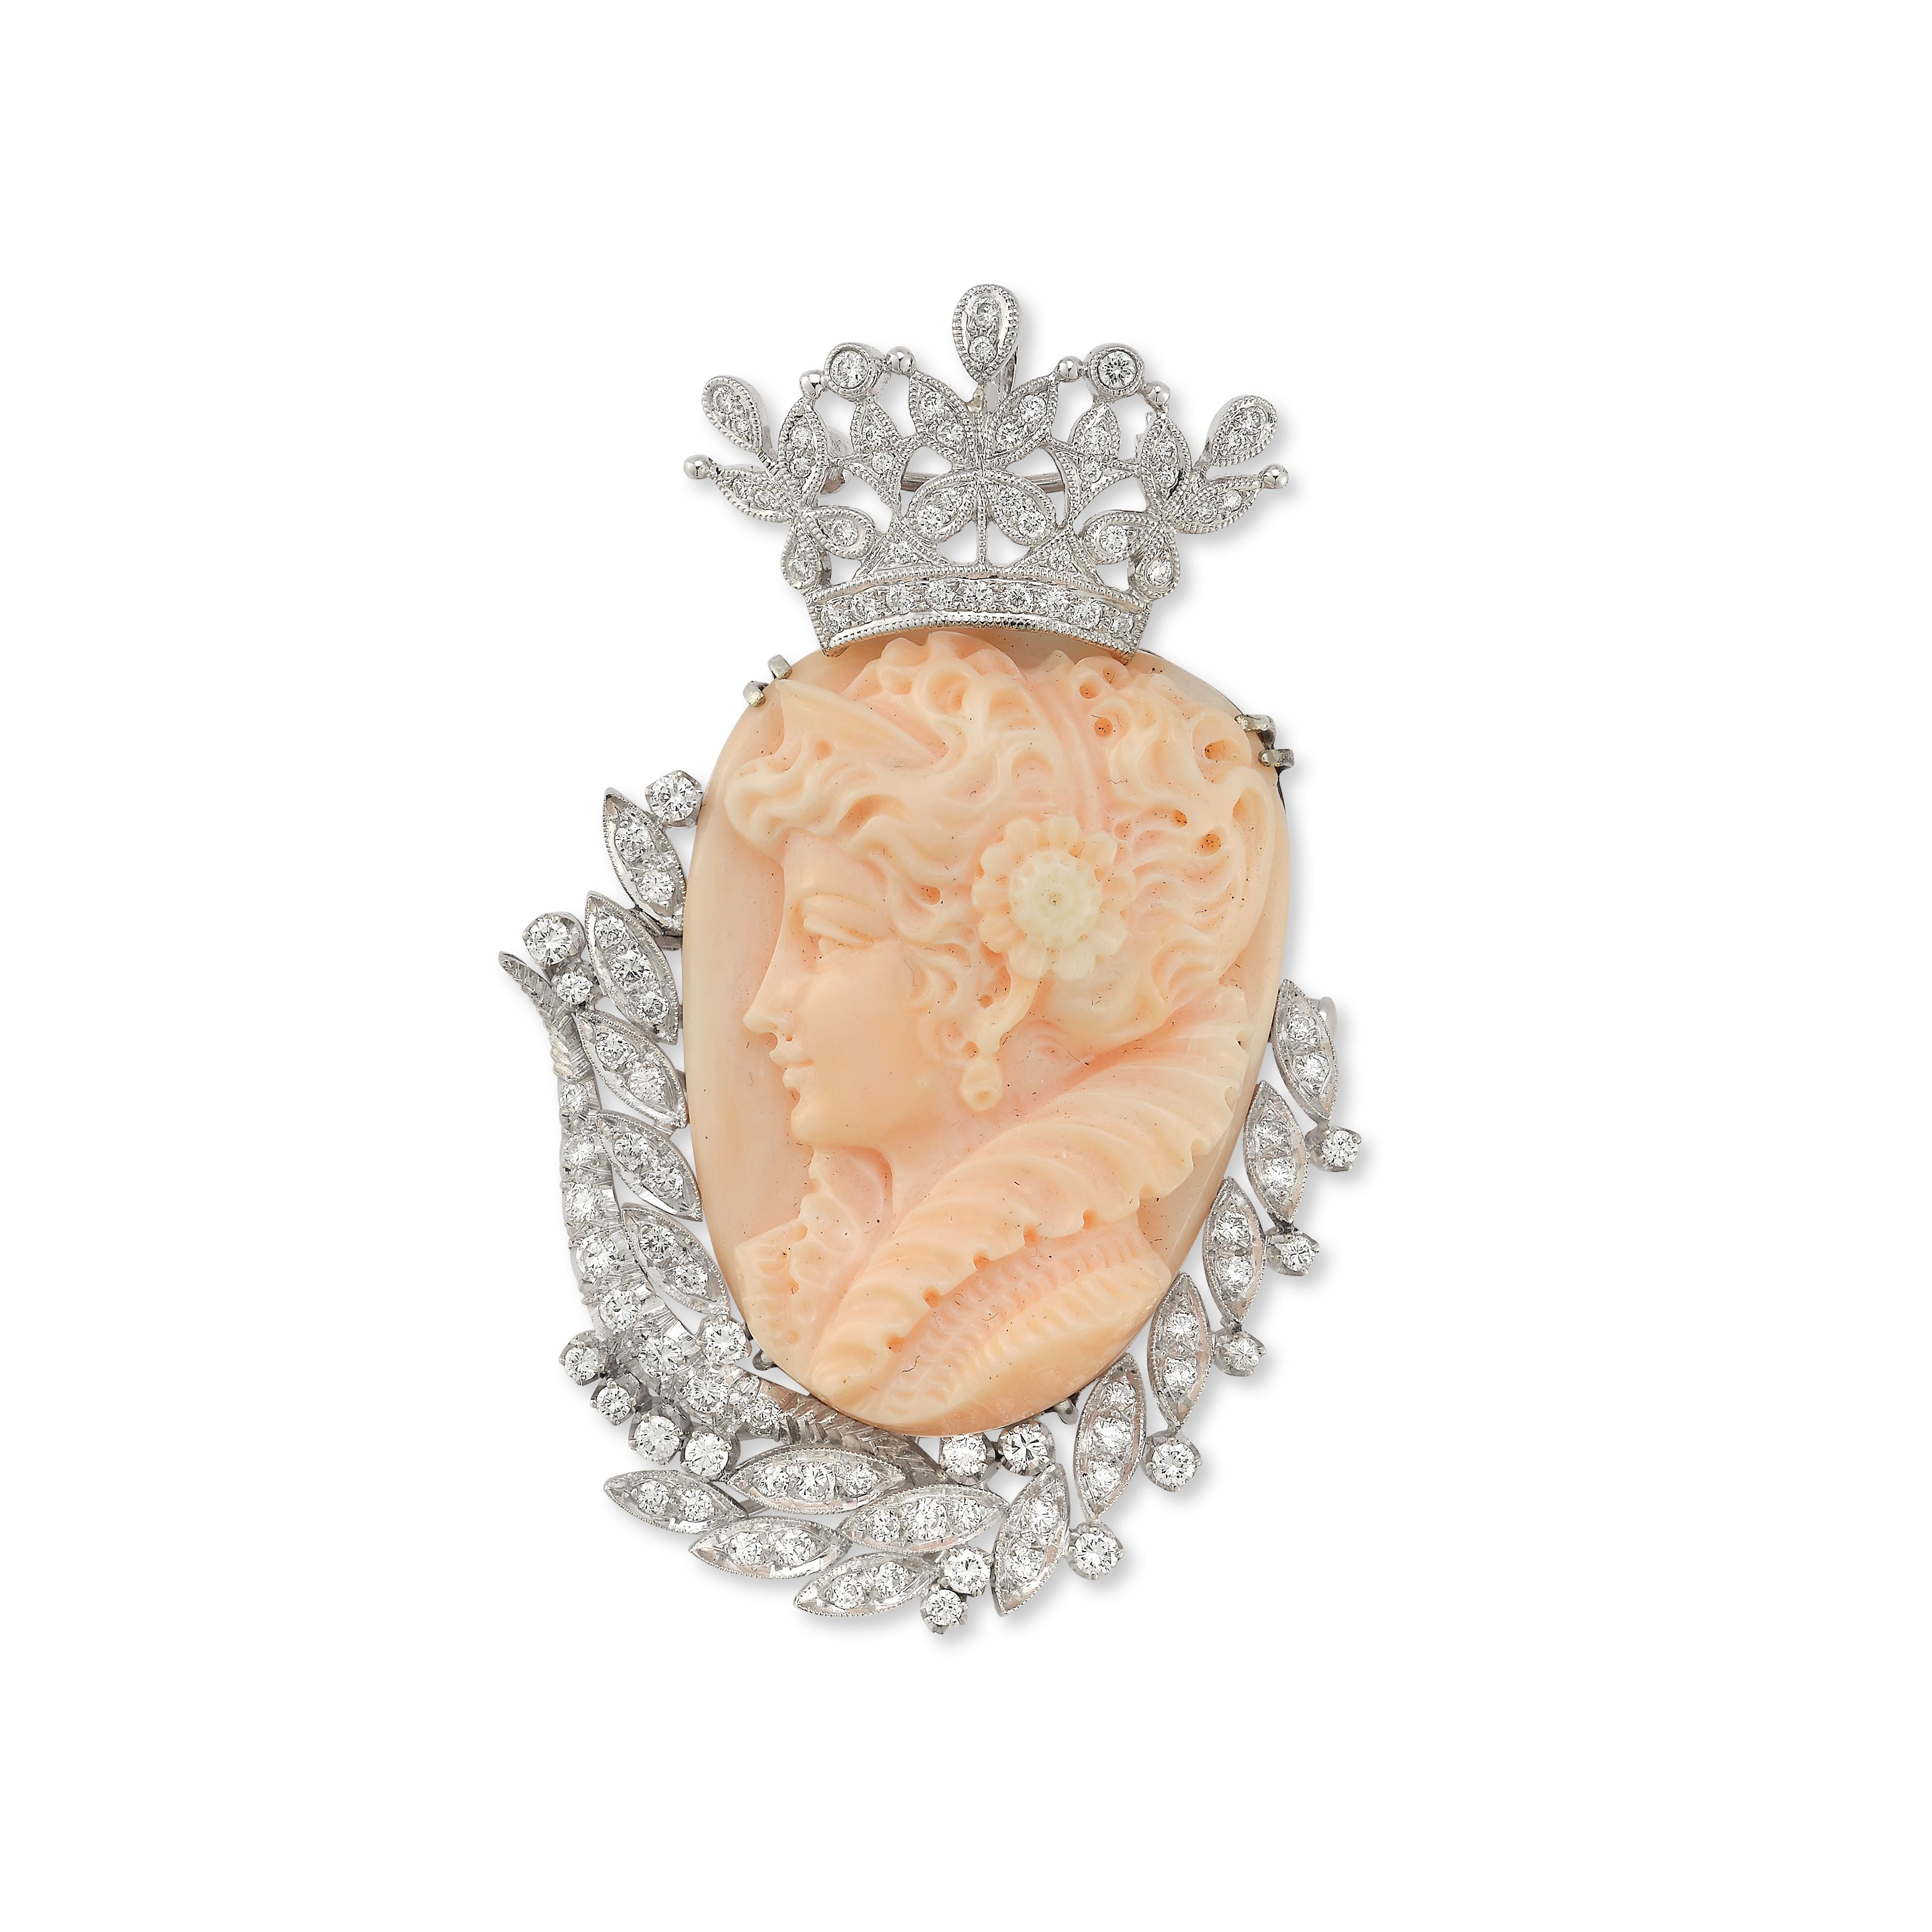 Angel Skin Coral Cameo & Diamond Brooch Pendant

18k white gold pin set with a carved coral face framed by 104 round diamonds 

Measurements: 2.5